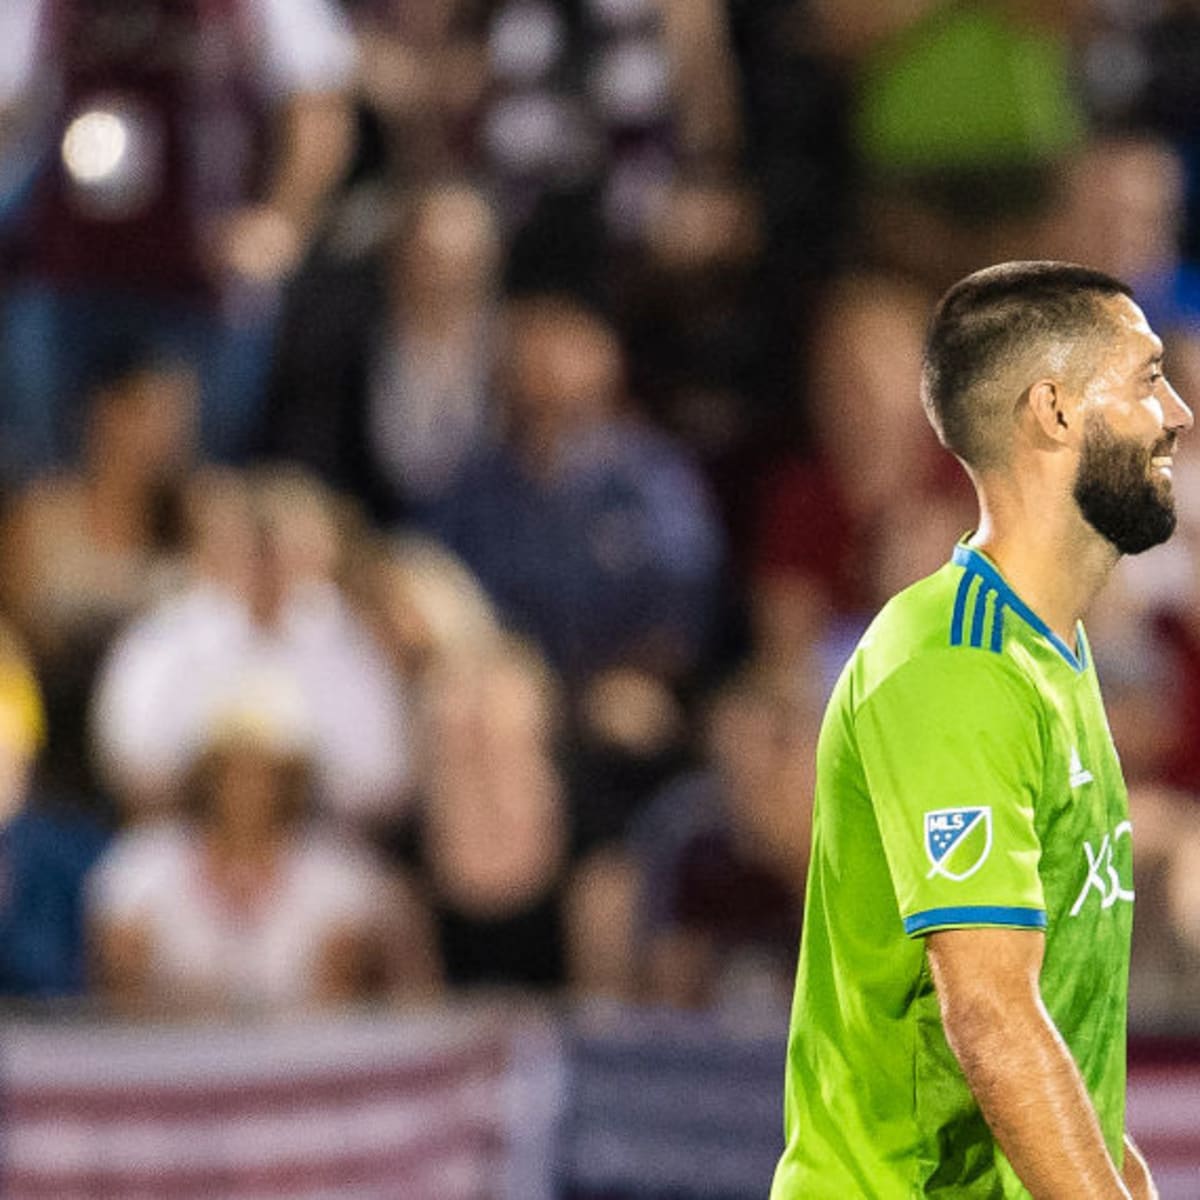 Clint Dempsey retires: American soccer legend steps away from the game